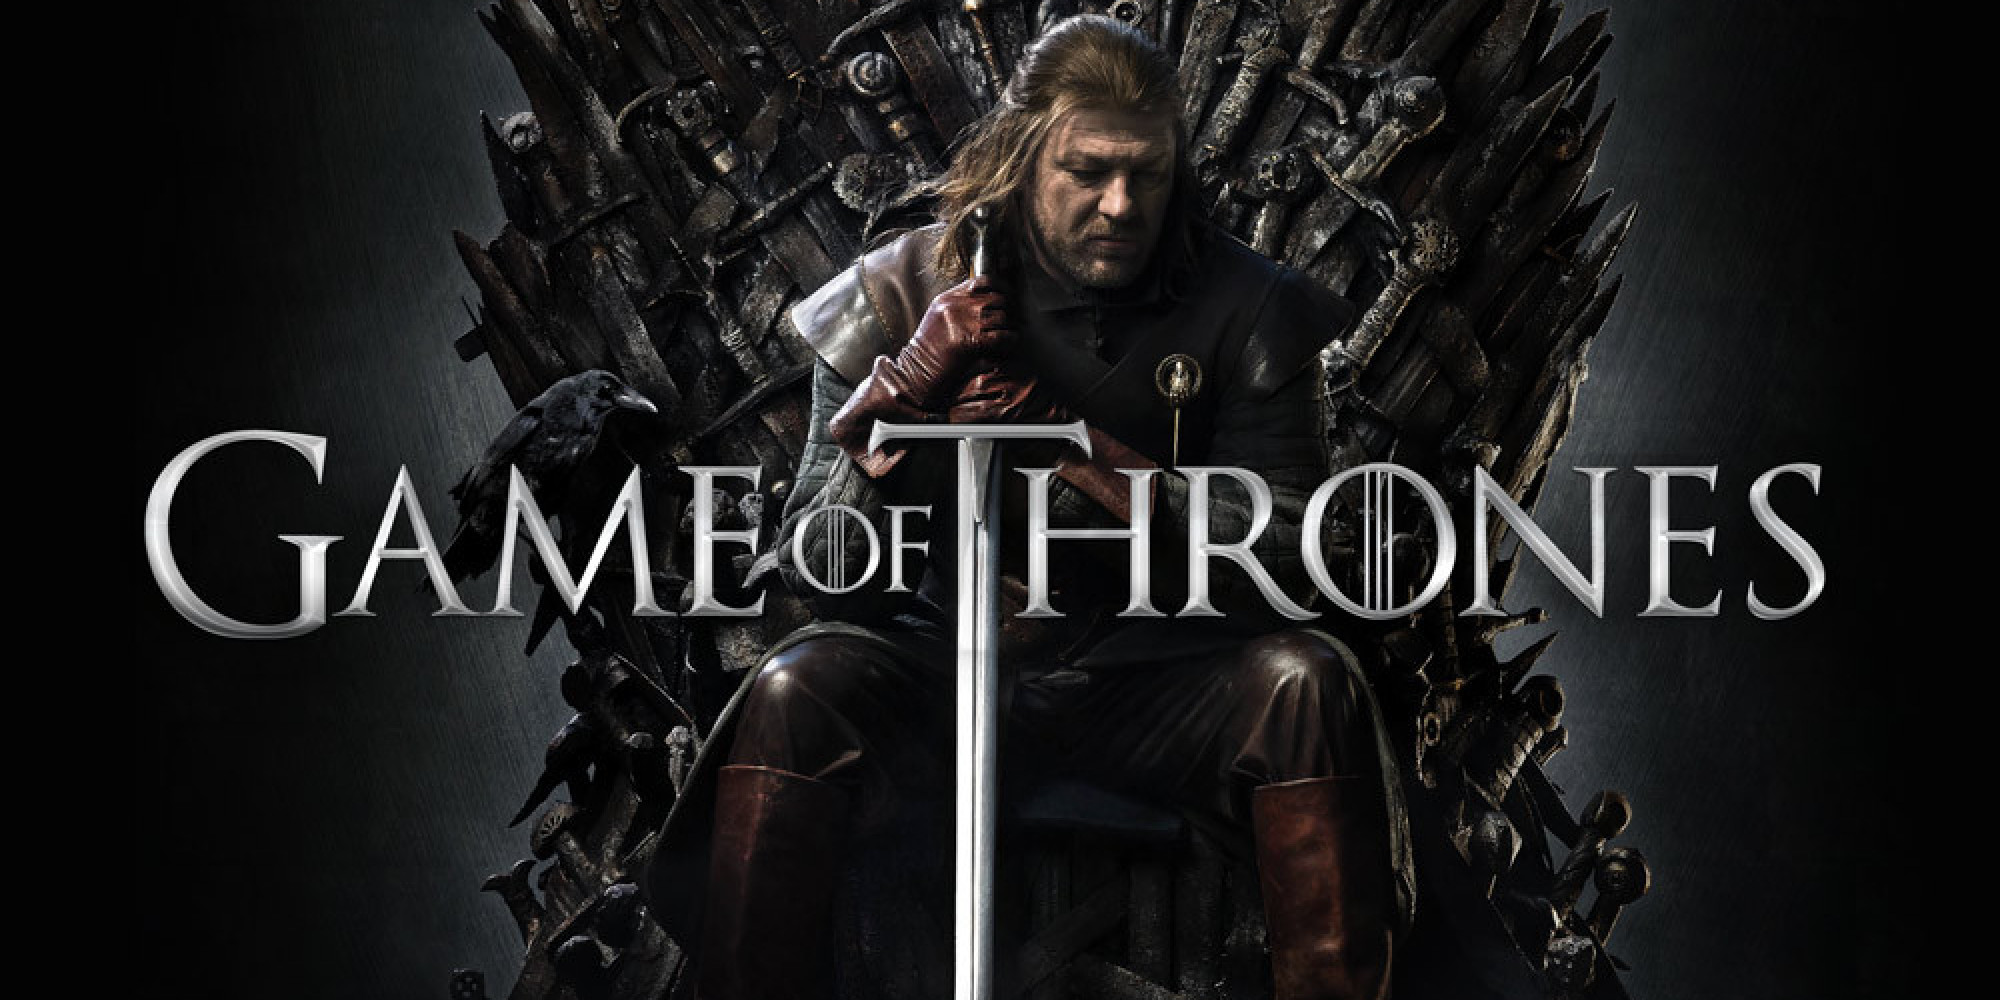 The mystry continues…Game of Throne